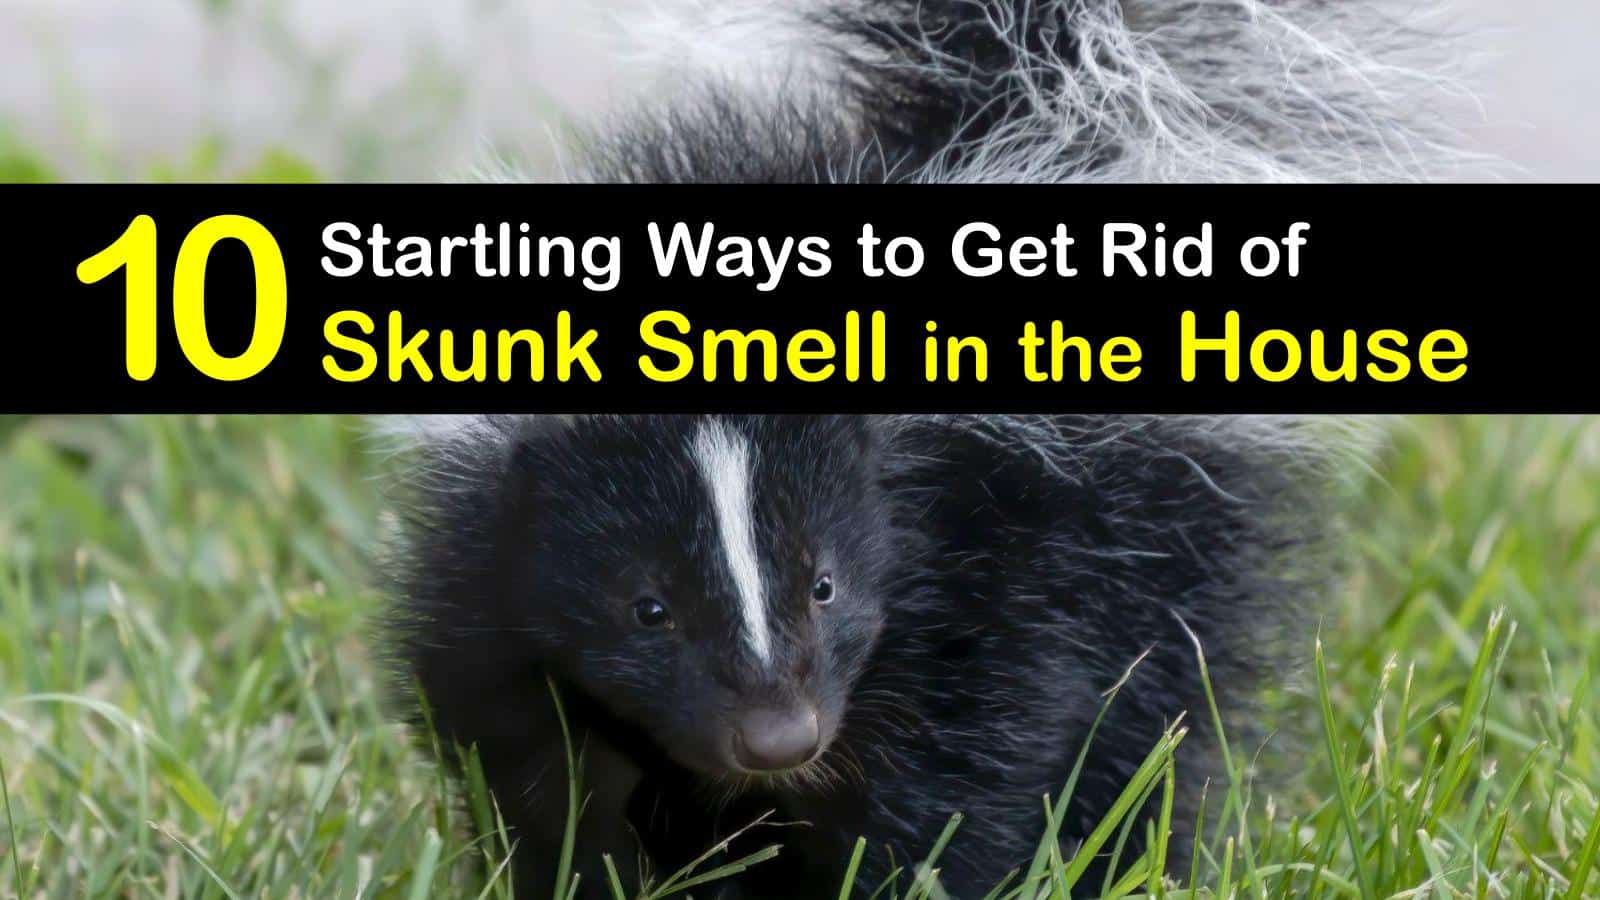 10 Startling Ways to Get Rid of Skunk Smell in the House - How To Get Rid Of Skunk Smell In House